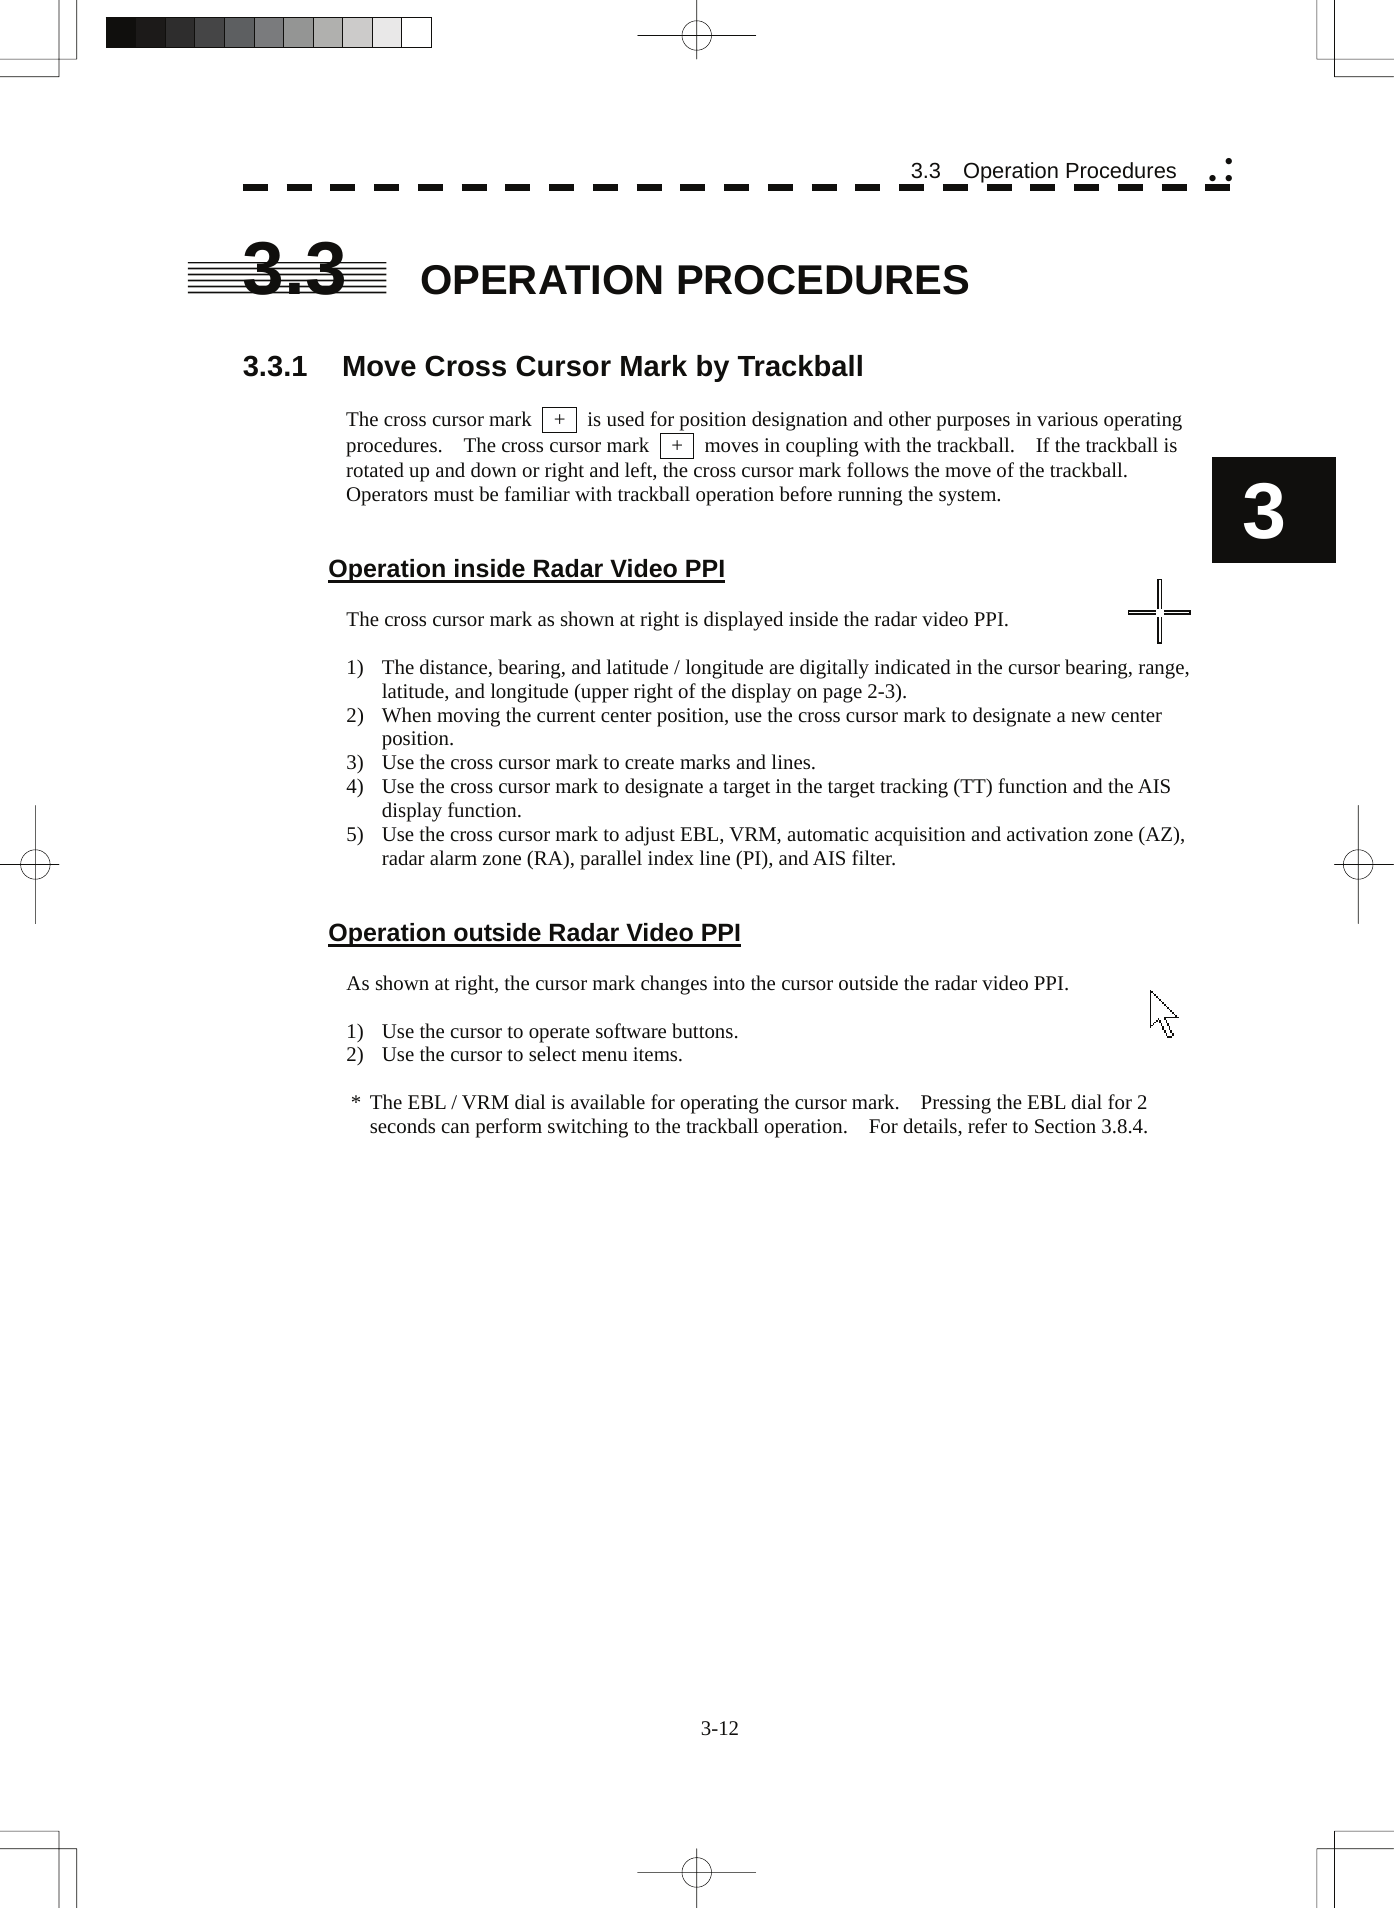  3-12 3.3  Operation Procedures yy y3 3.3  OPERATION PROCEDURES  3.3.1  Move Cross Cursor Mark by Trackball  The cross cursor mark    +    is used for position designation and other purposes in various operating procedures.    The cross cursor mark    +    moves in coupling with the trackball.    If the trackball is rotated up and down or right and left, the cross cursor mark follows the move of the trackball. Operators must be familiar with trackball operation before running the system.   Operation inside Radar Video PPI  The cross cursor mark as shown at right is displayed inside the radar video PPI.  1)  The distance, bearing, and latitude / longitude are digitally indicated in the cursor bearing, range, latitude, and longitude (upper right of the display on page 2-3). 2)  When moving the current center position, use the cross cursor mark to designate a new center position. 3)  Use the cross cursor mark to create marks and lines. 4)  Use the cross cursor mark to designate a target in the target tracking (TT) function and the AIS display function. 5)  Use the cross cursor mark to adjust EBL, VRM, automatic acquisition and activation zone (AZ), radar alarm zone (RA), parallel index line (PI), and AIS filter.   Operation outside Radar Video PPI  As shown at right, the cursor mark changes into the cursor outside the radar video PPI.  1)  Use the cursor to operate software buttons. 2)  Use the cursor to select menu items.  *  The EBL / VRM dial is available for operating the cursor mark.    Pressing the EBL dial for 2 seconds can perform switching to the trackball operation.    For details, refer to Section 3.8.4.    